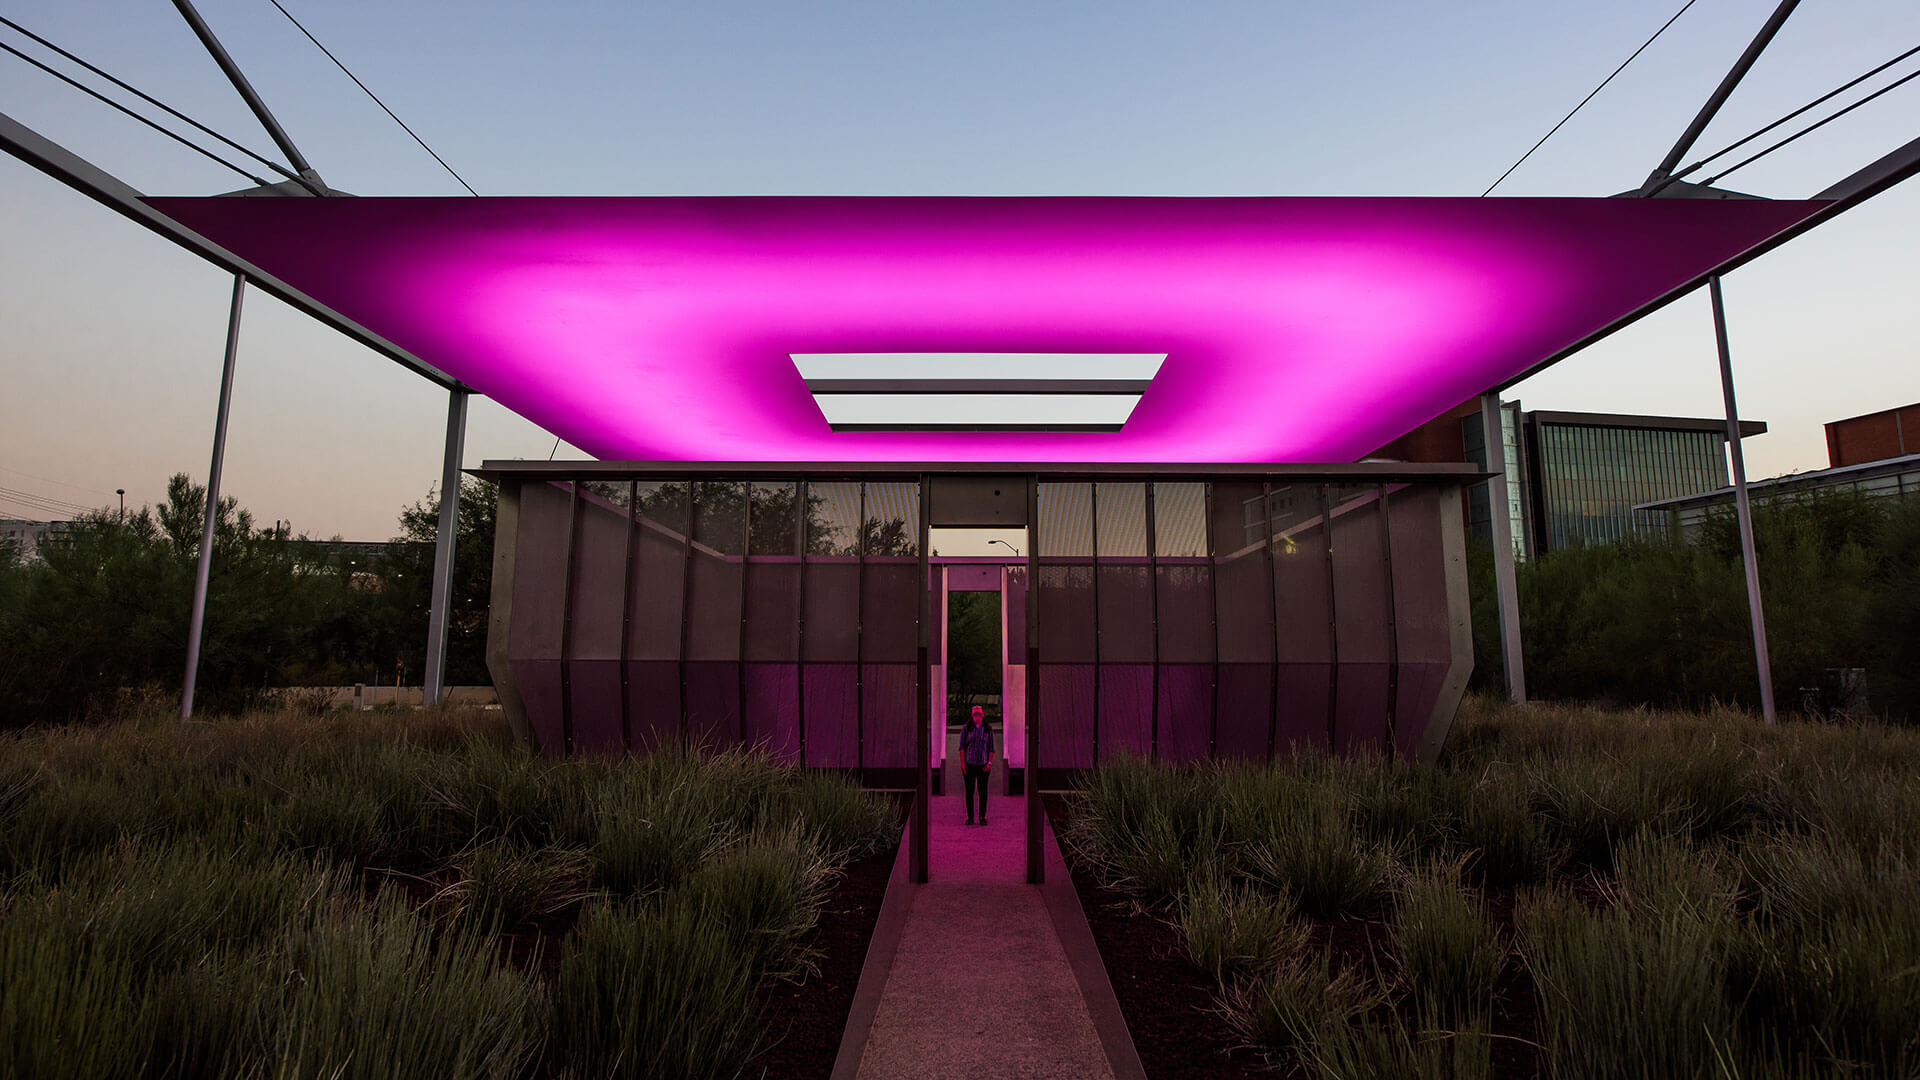 
		A lit magenta shade structure		